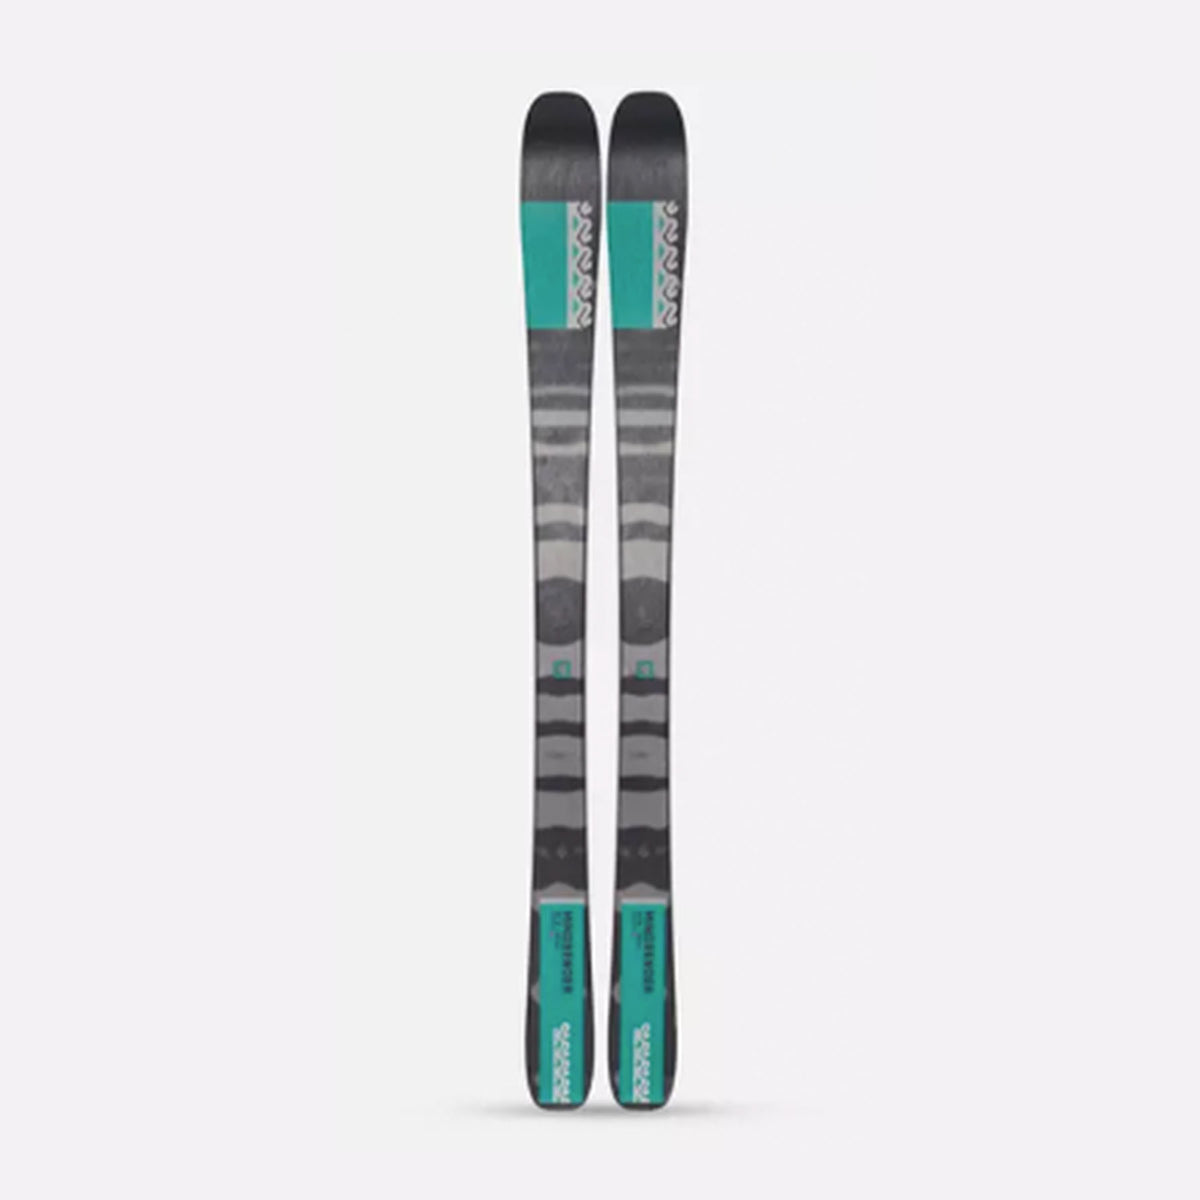 Hero image featuring the top of the Women's K2 Mindbender 85 skis in grey and teal.